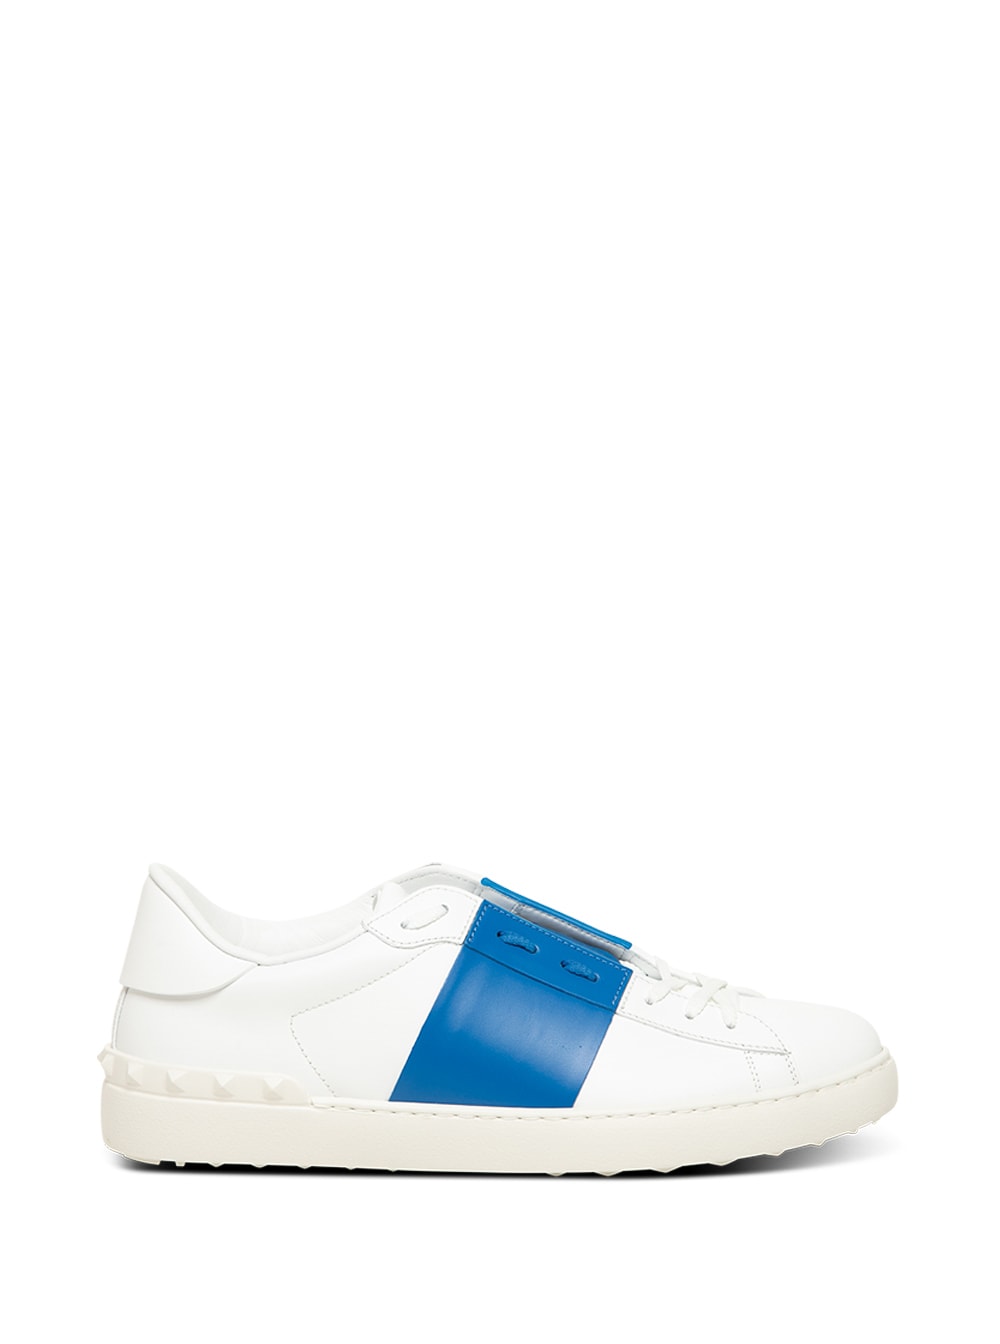 VALENTINO GARAVANI WHITE LEATHER OPEN SNEAKERS WITH BLUE DETAIL